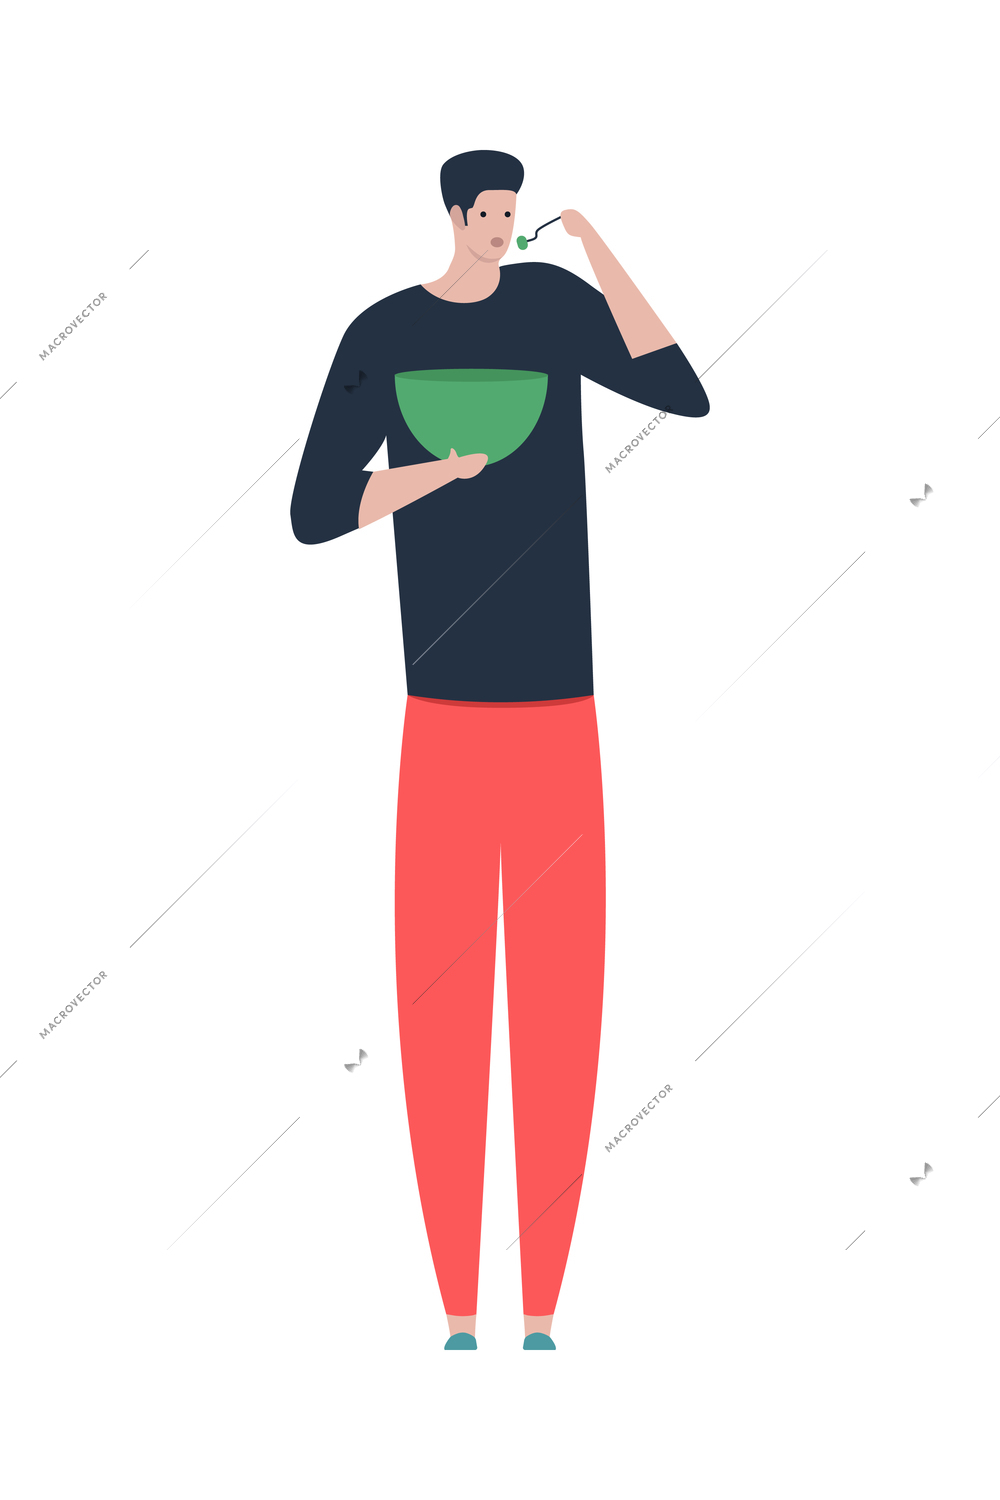 Healthy lifestyle flat composition with isolated character of eating man holding dish on blank background vector illustration